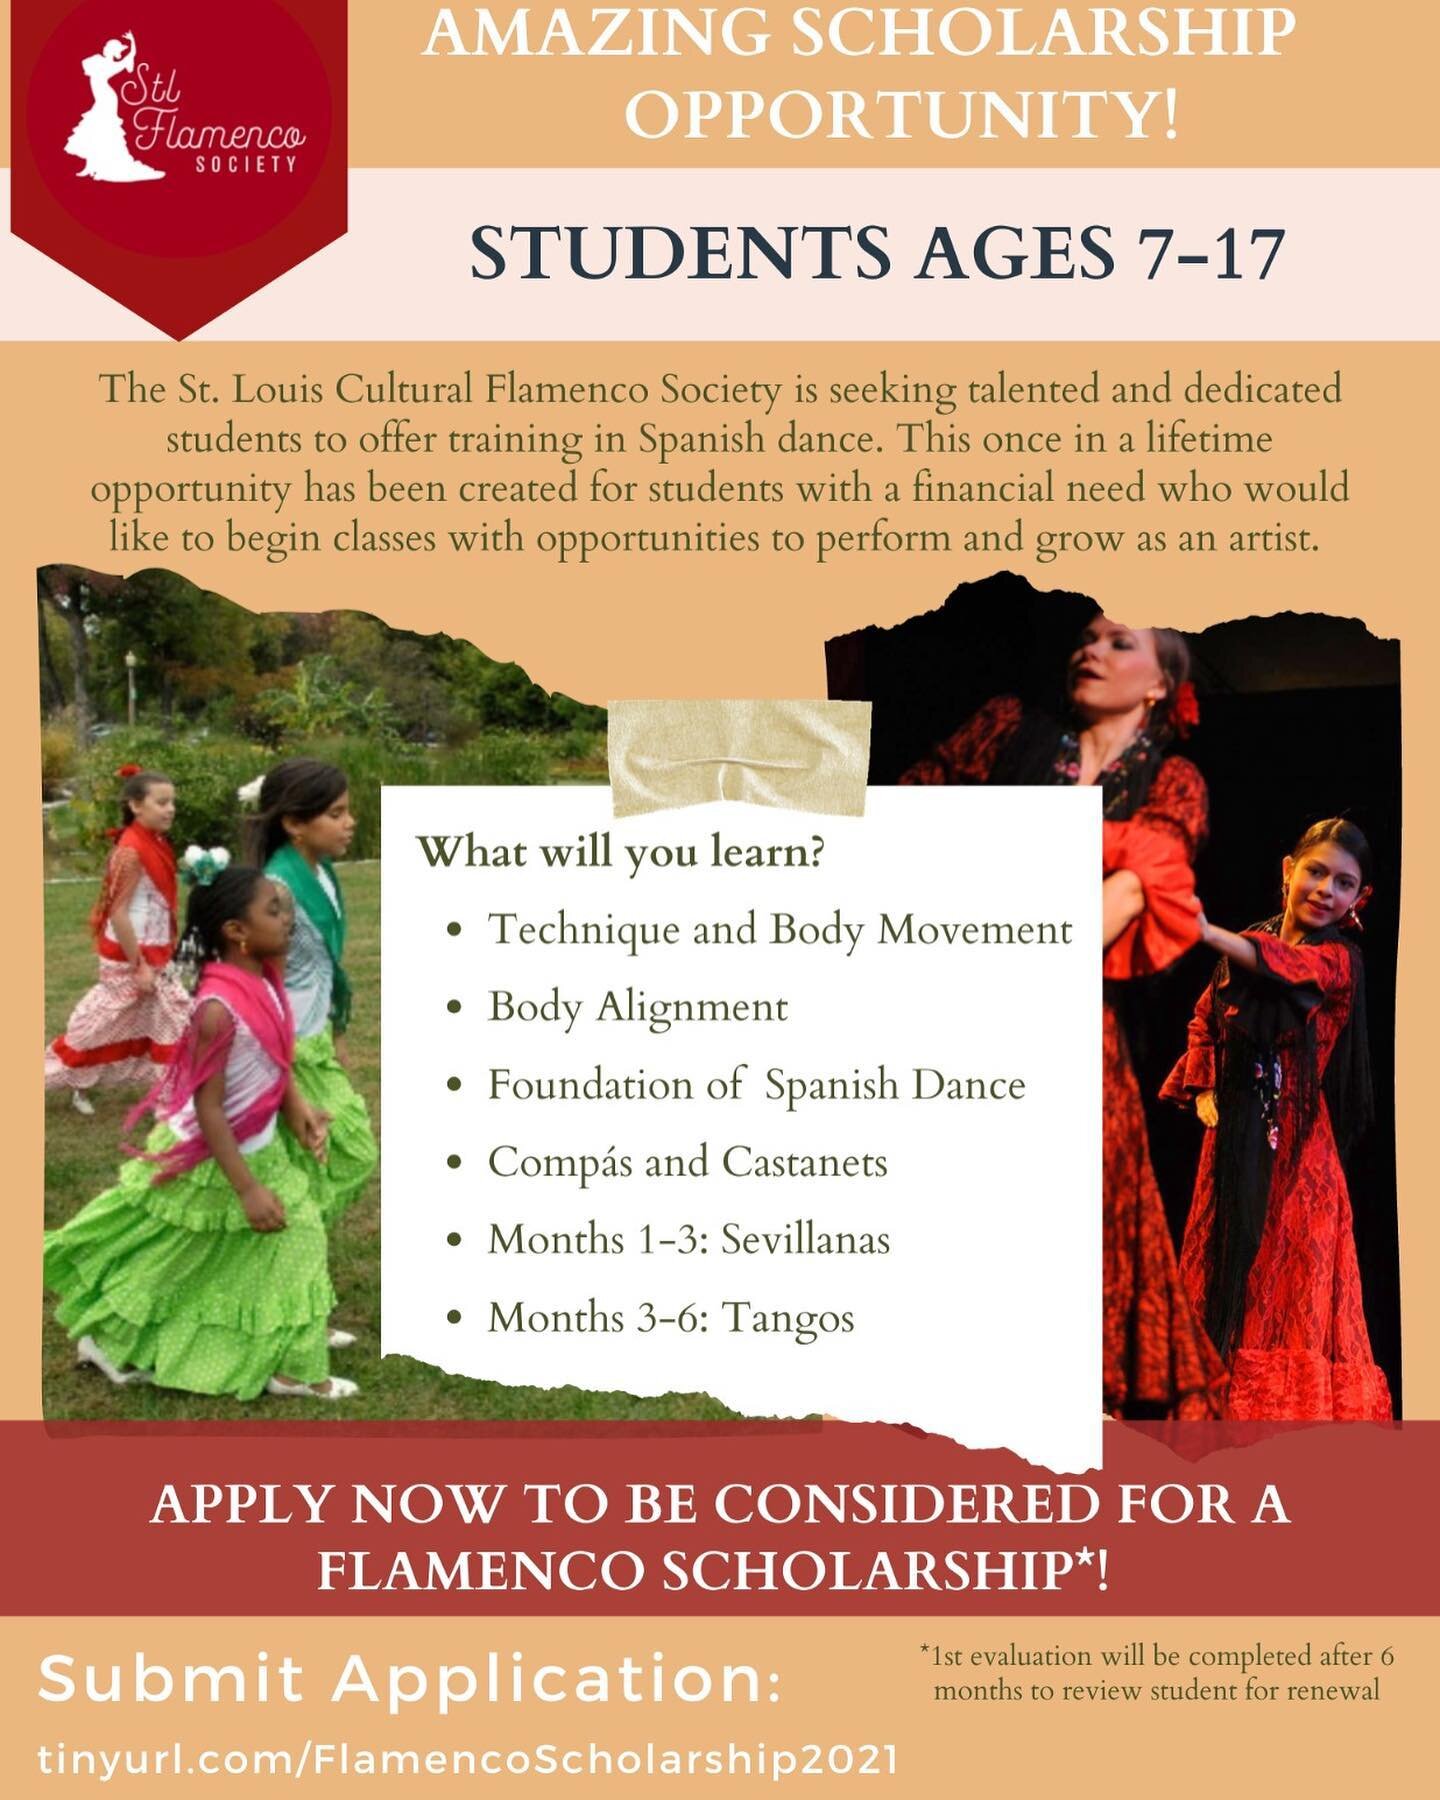 Apply for our flamenco scholarship!